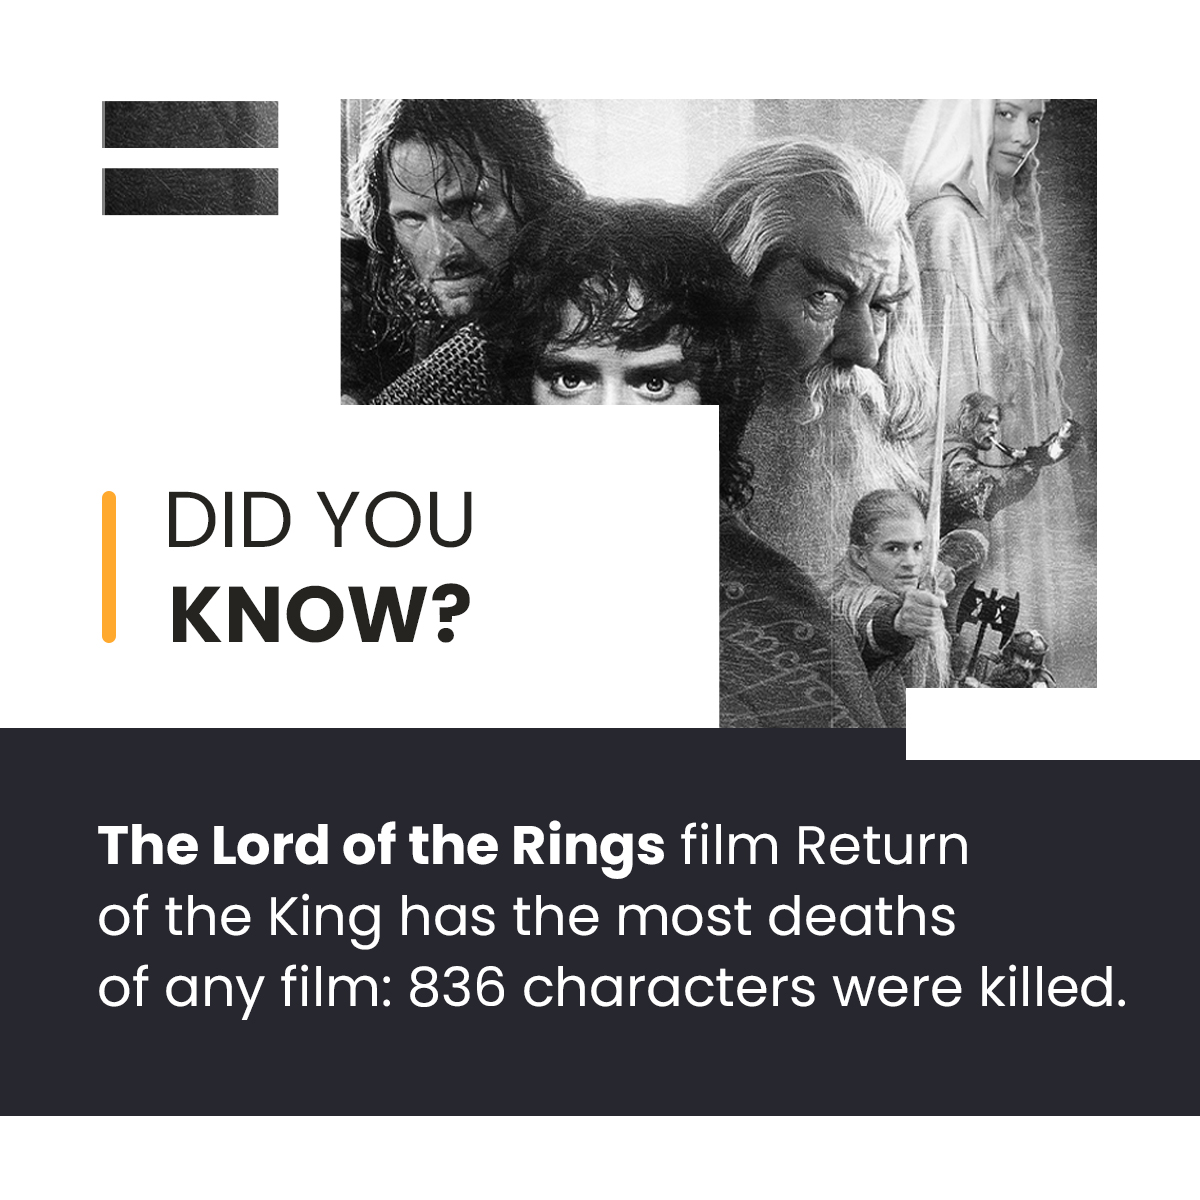 That's a lot of deaths!

#moviesfacts #didyouknowfacts